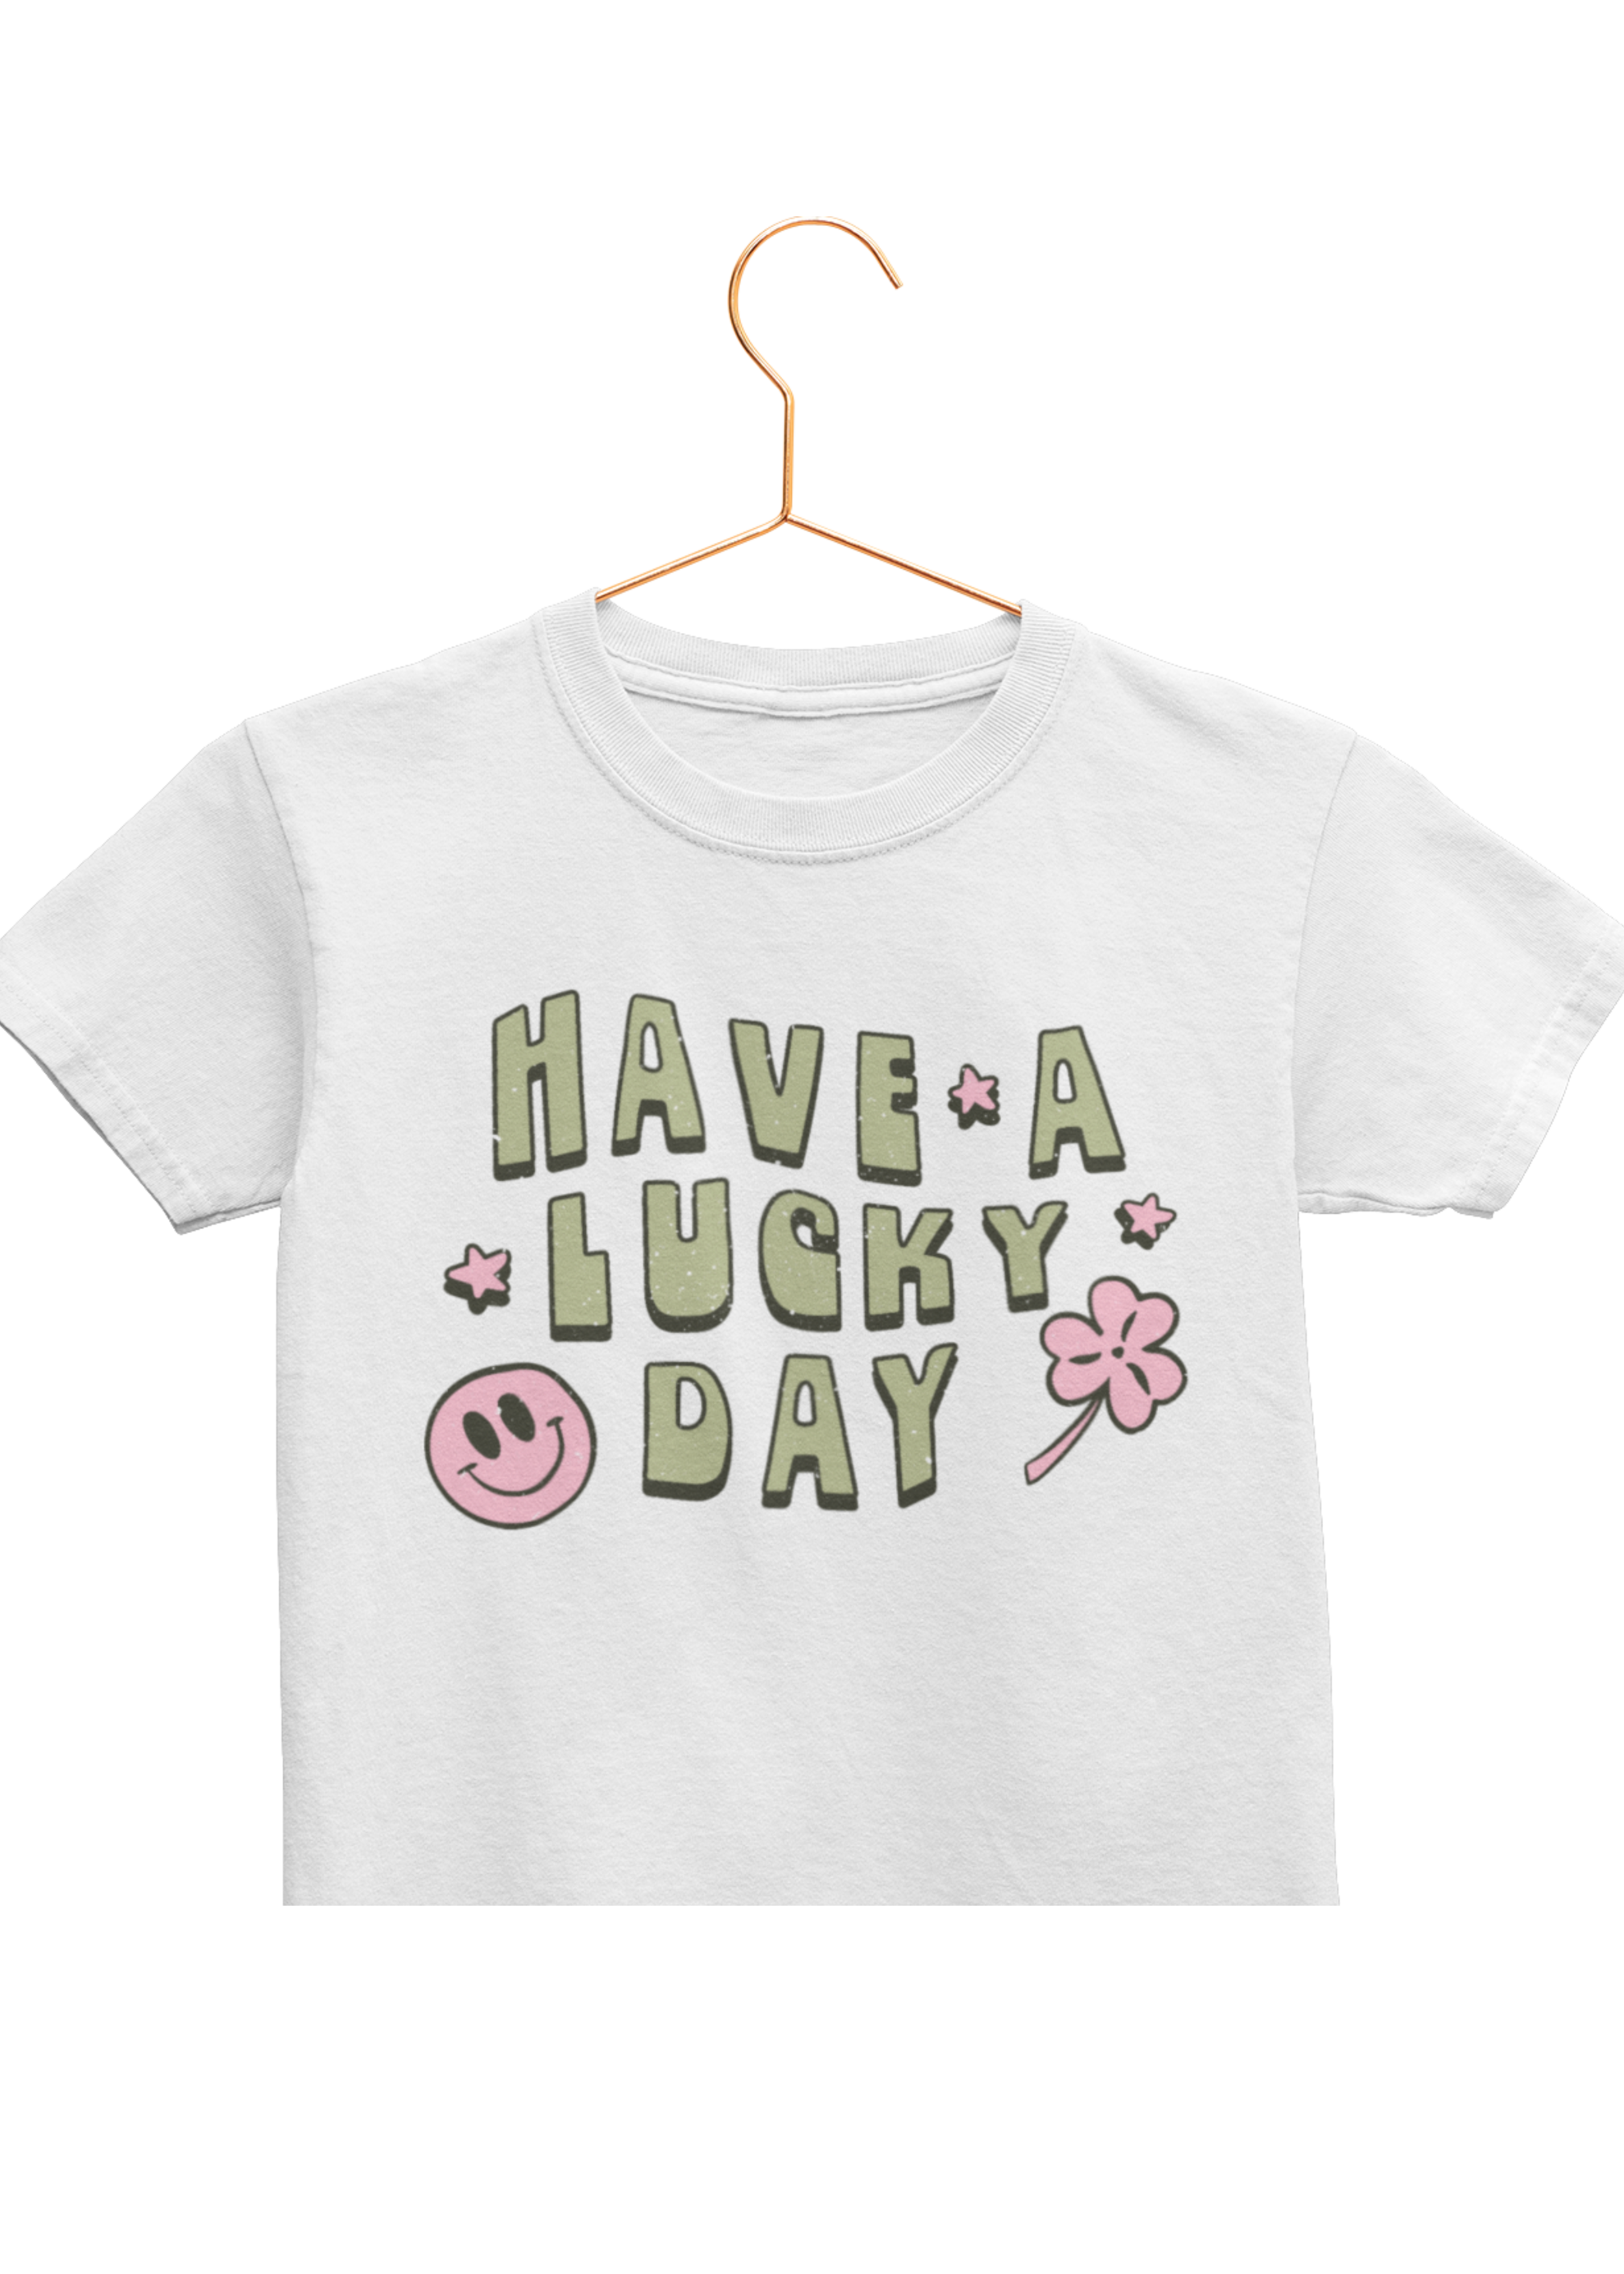 Have a Lucky Day Toddler Tee